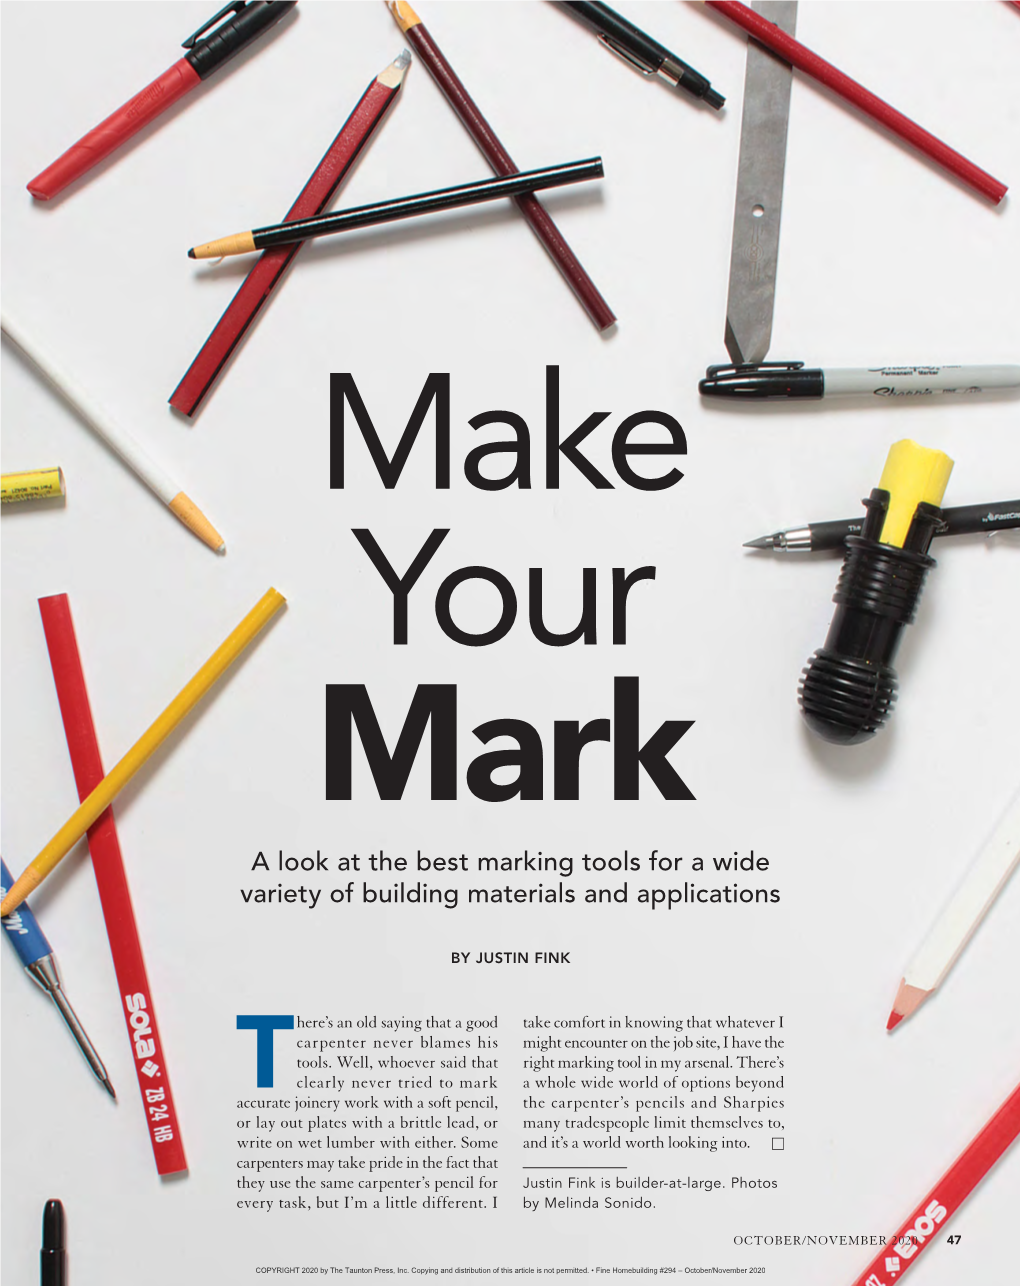 A Look at the Best Marking Tools for a Wide Variety of Building Materials and Applications